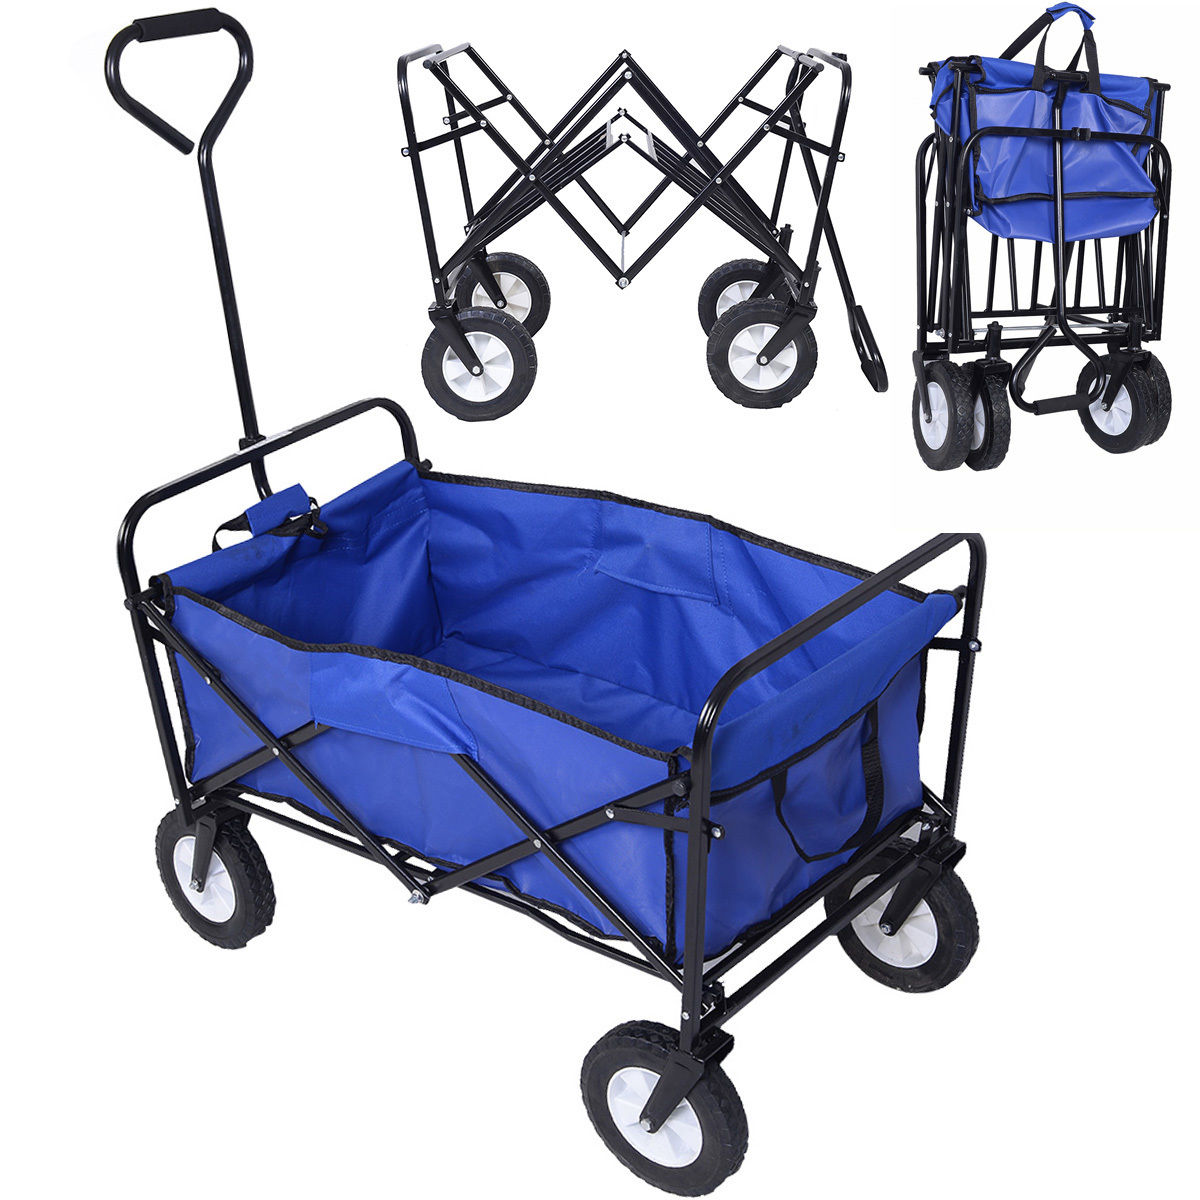 Collapsible Folding Wagon Cart ONLY $48.99 Shipped! Perfect for Sporting Events, The Beach, The Zoo and More!